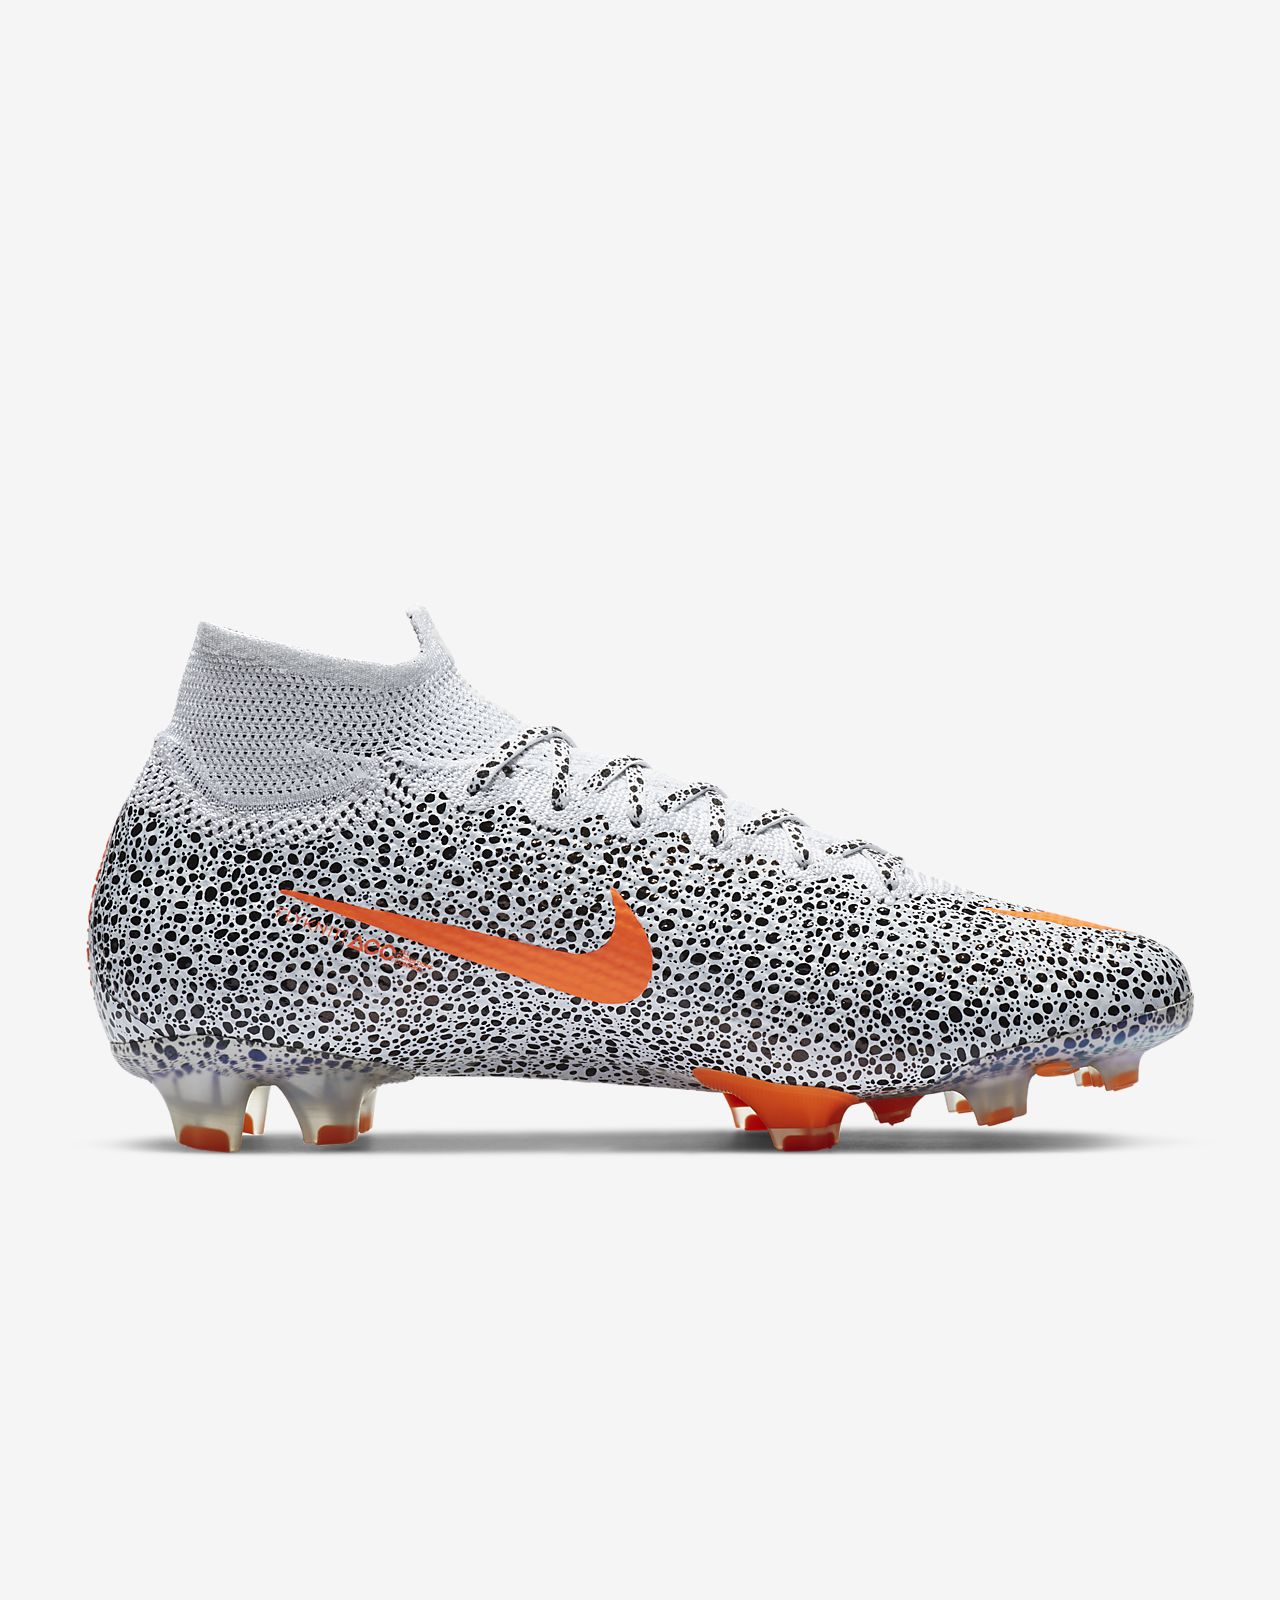 Buy Nike JR Superfly 6 Elite FG Gray Yellow for only 60